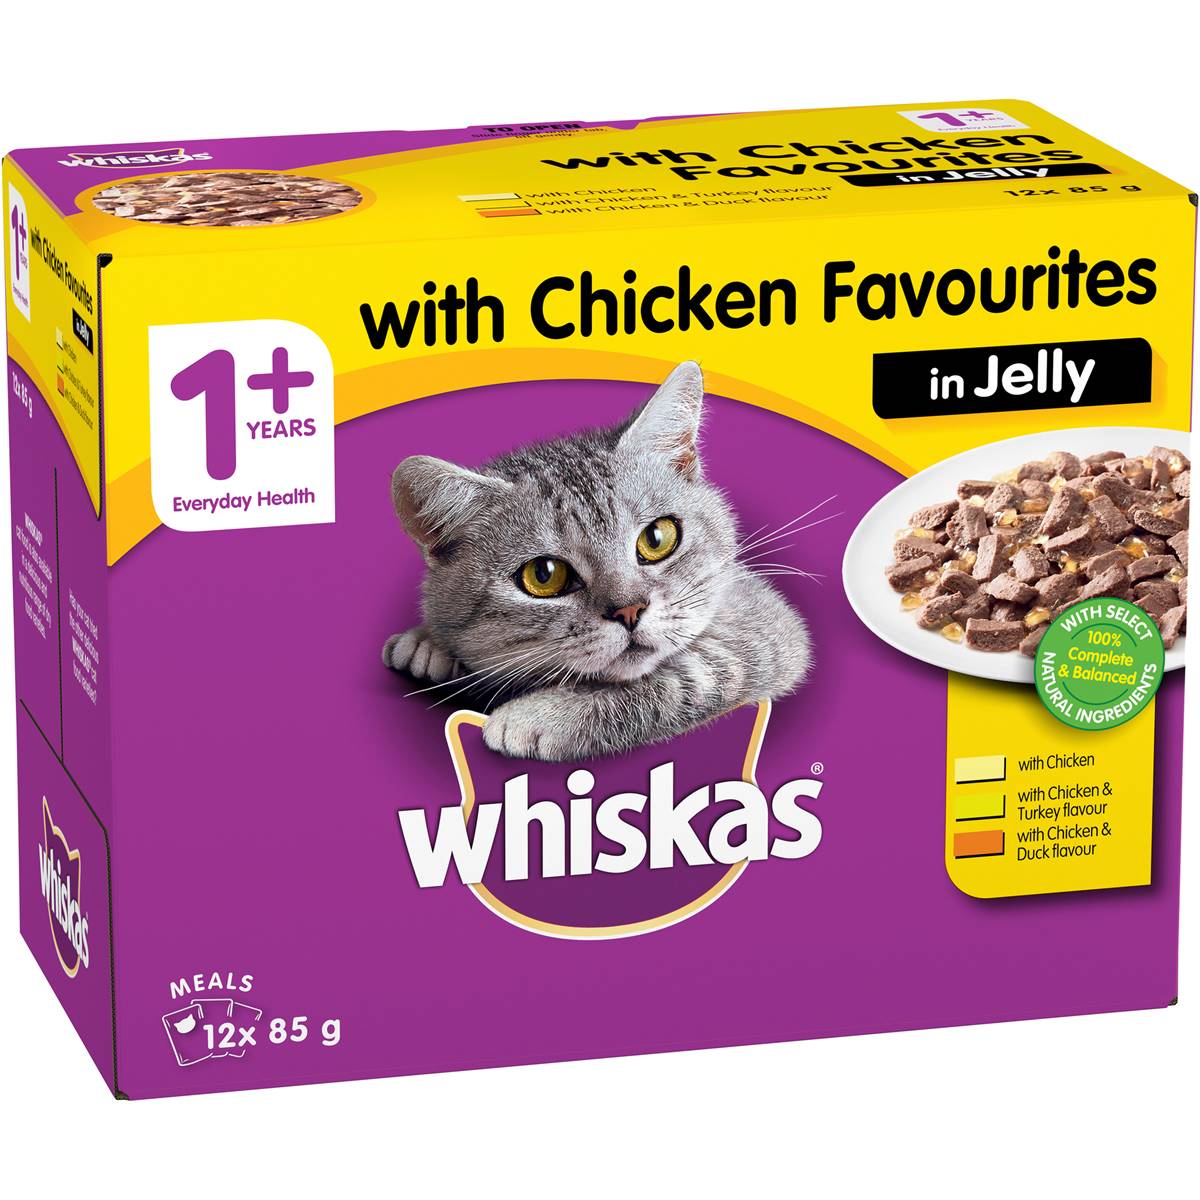 Whiskas 1+ Years Wet Cat Food Chicken In Jelly Pouch 12x85g